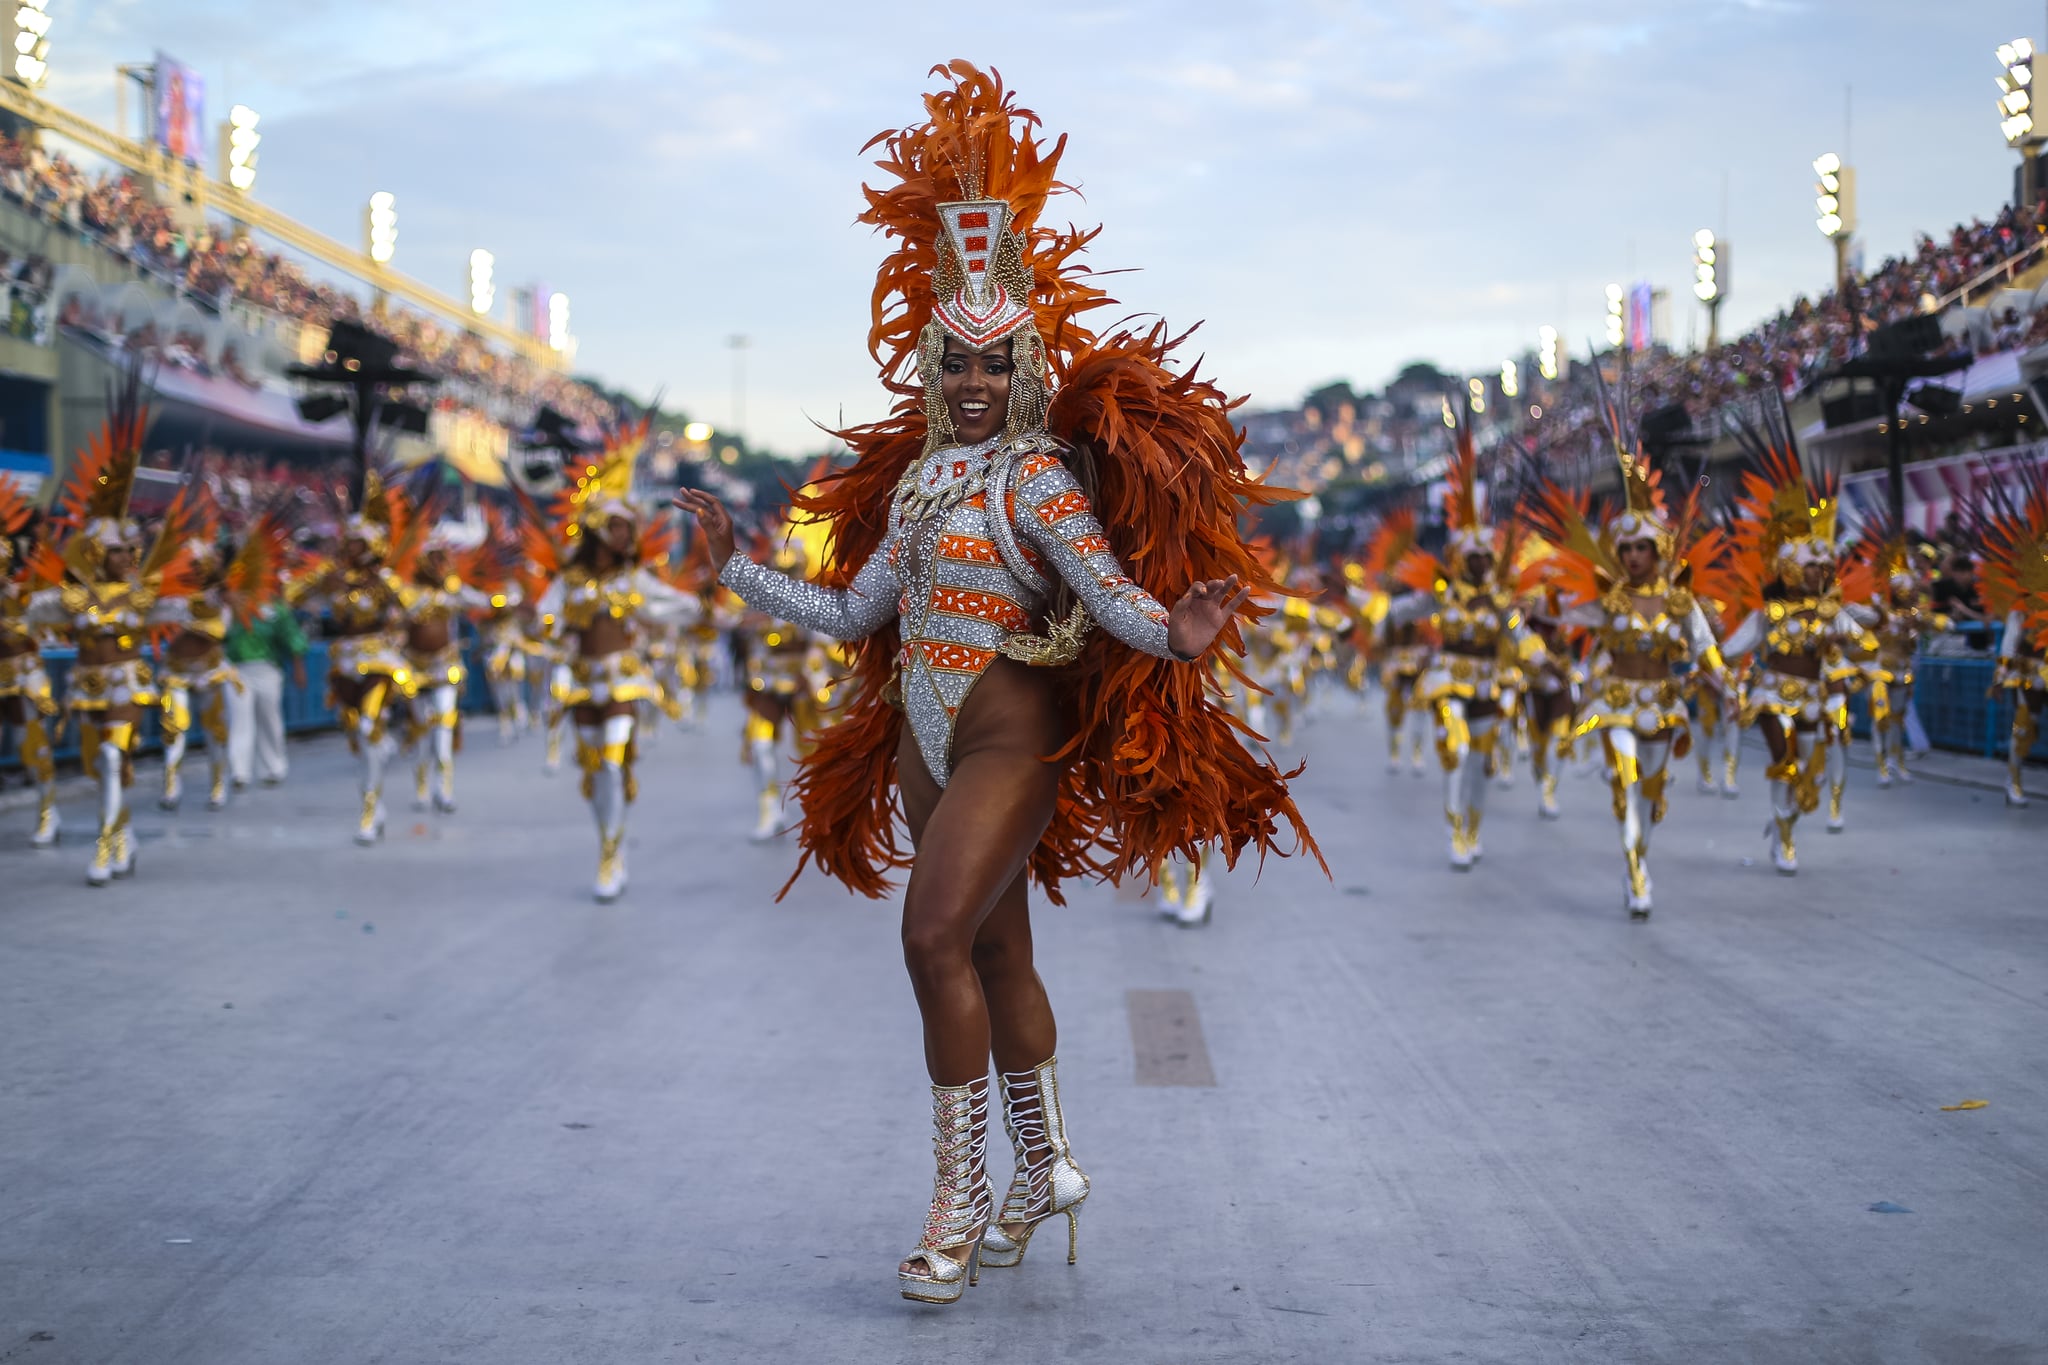 RIO DE JANEIRO, BRAZIL - MARCH 04: A member of Mocidade Independente de Padre Miguel Samba School performs during the parade at 2019 Brazilian Carnival at Sapucai Sambadrome on March 04, 2019 in Rio de Janeiro, Brazil. Rio's two nights of Carnival parades began on March 03 in a burst of fireworks and to the cheers of thousands of tourists and locals who have previously enjoyed street celebrations (known as 'blocos de rua') all around the city. (Photo by Buda Mendes/Getty Images)